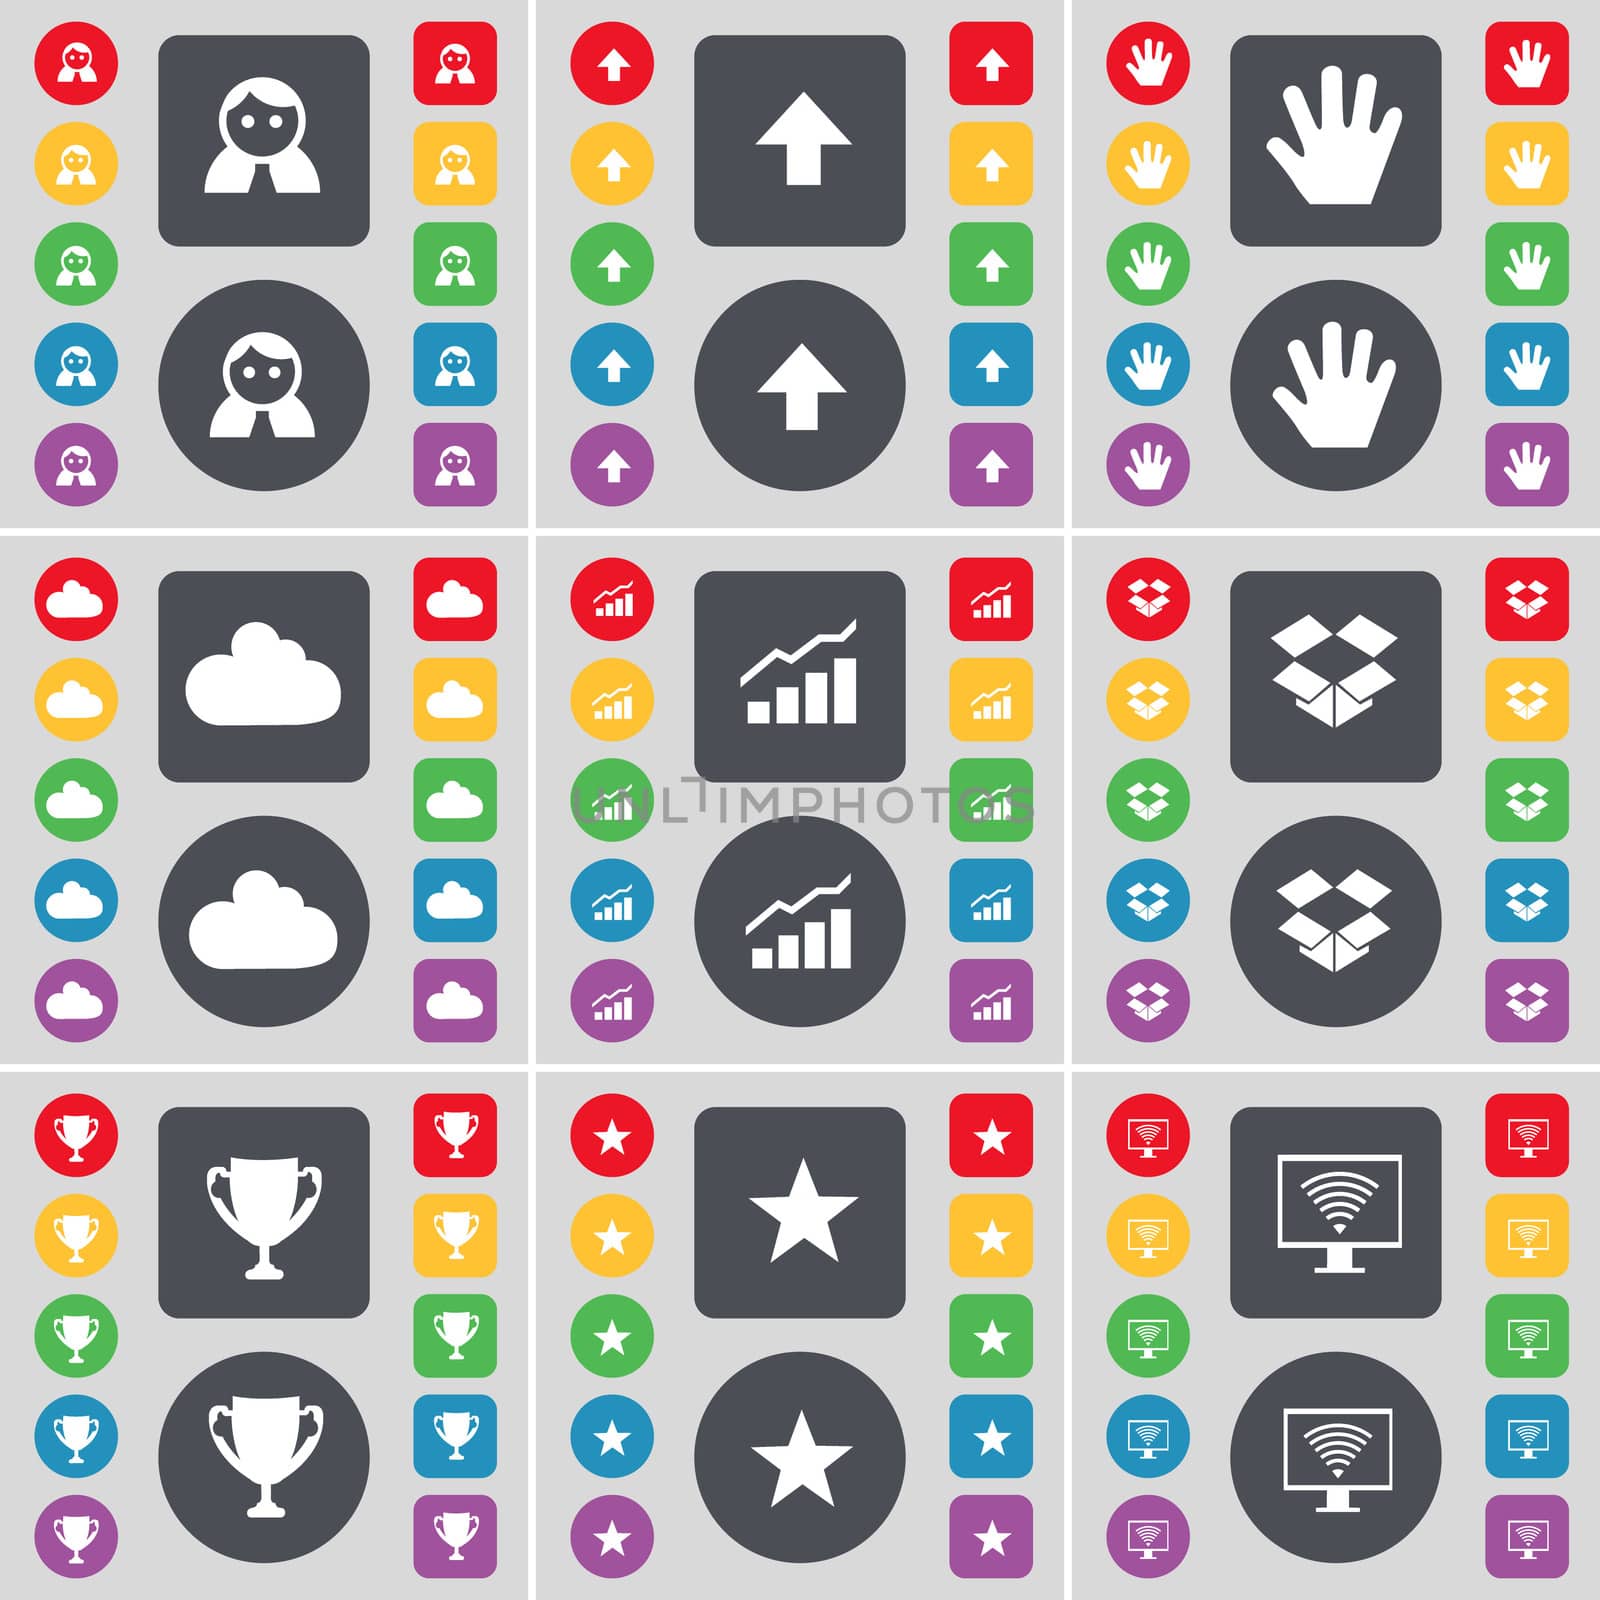 Avatar, Arrow up, Hand, Cloud, Graph, Dropbox, Cup, Star, Monitor icon symbol. A large set of flat, colored buttons for your design.  by serhii_lohvyniuk